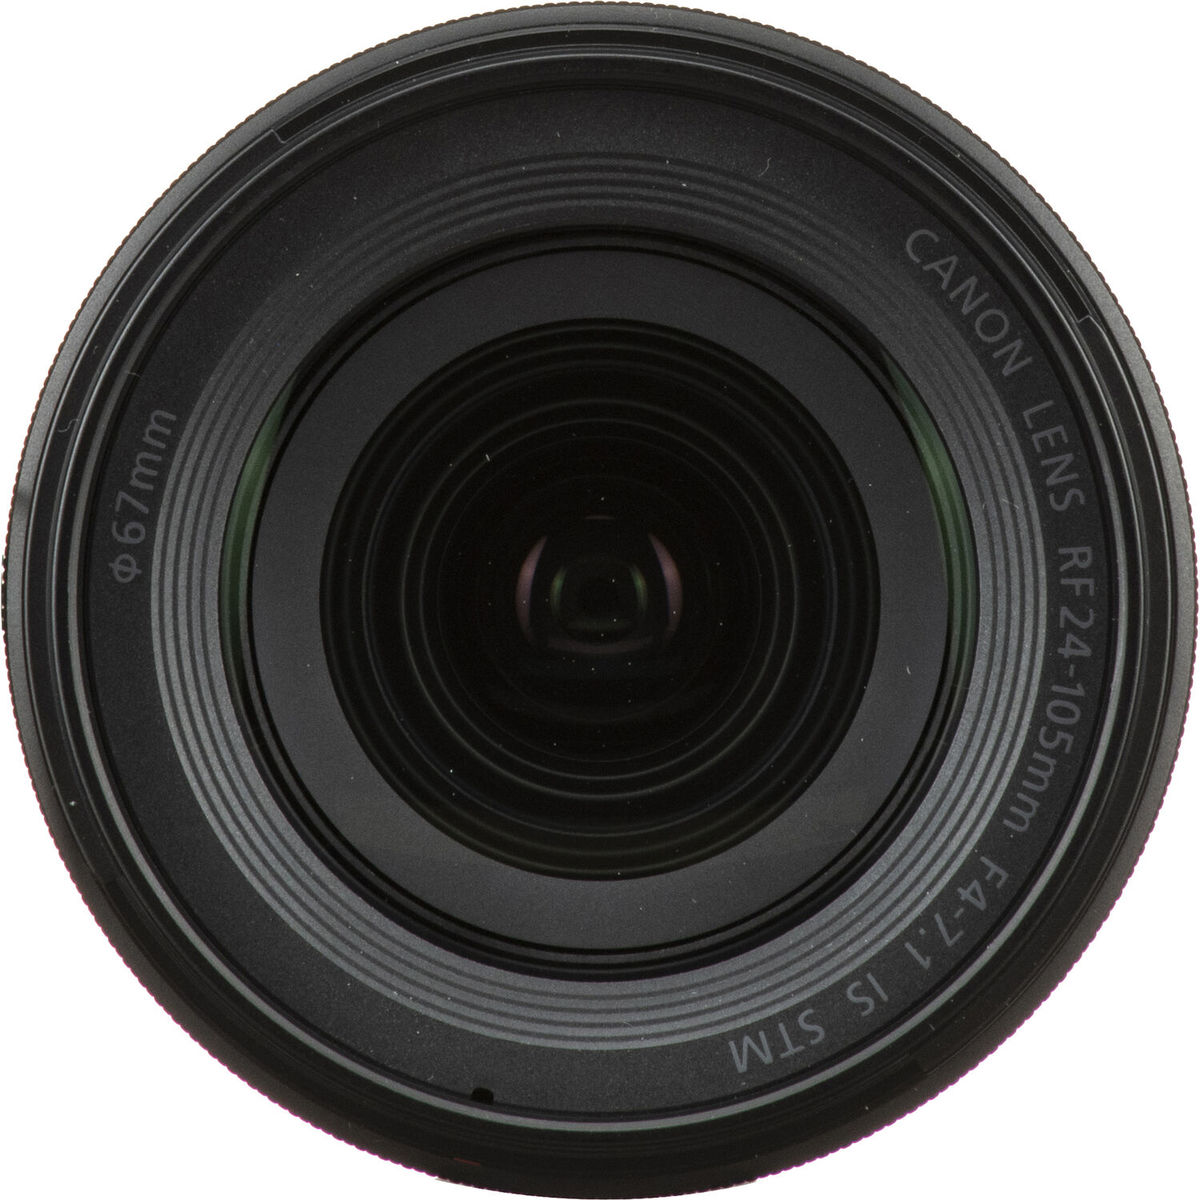 5. Canon RF 24-105mm F4-7.1 IS STM